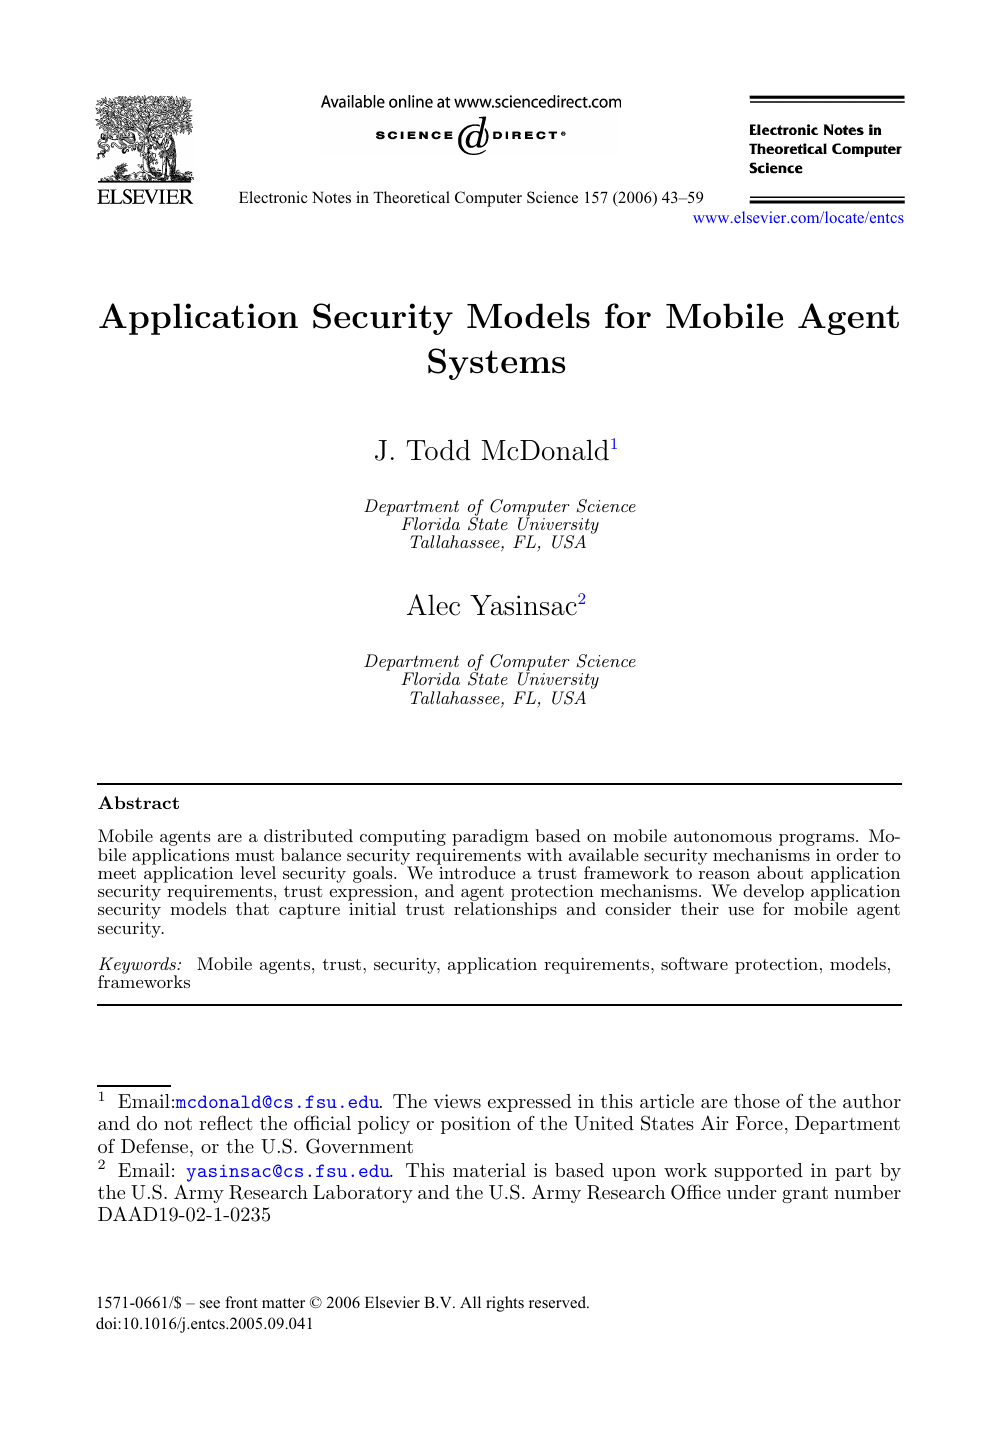 Application Security Models For Mobile Agent Systems Topic Of Research Paper In Computer And Information Sciences Download Scholarly Article Pdf And Read For Free On Cyberleninka Open Science Hub